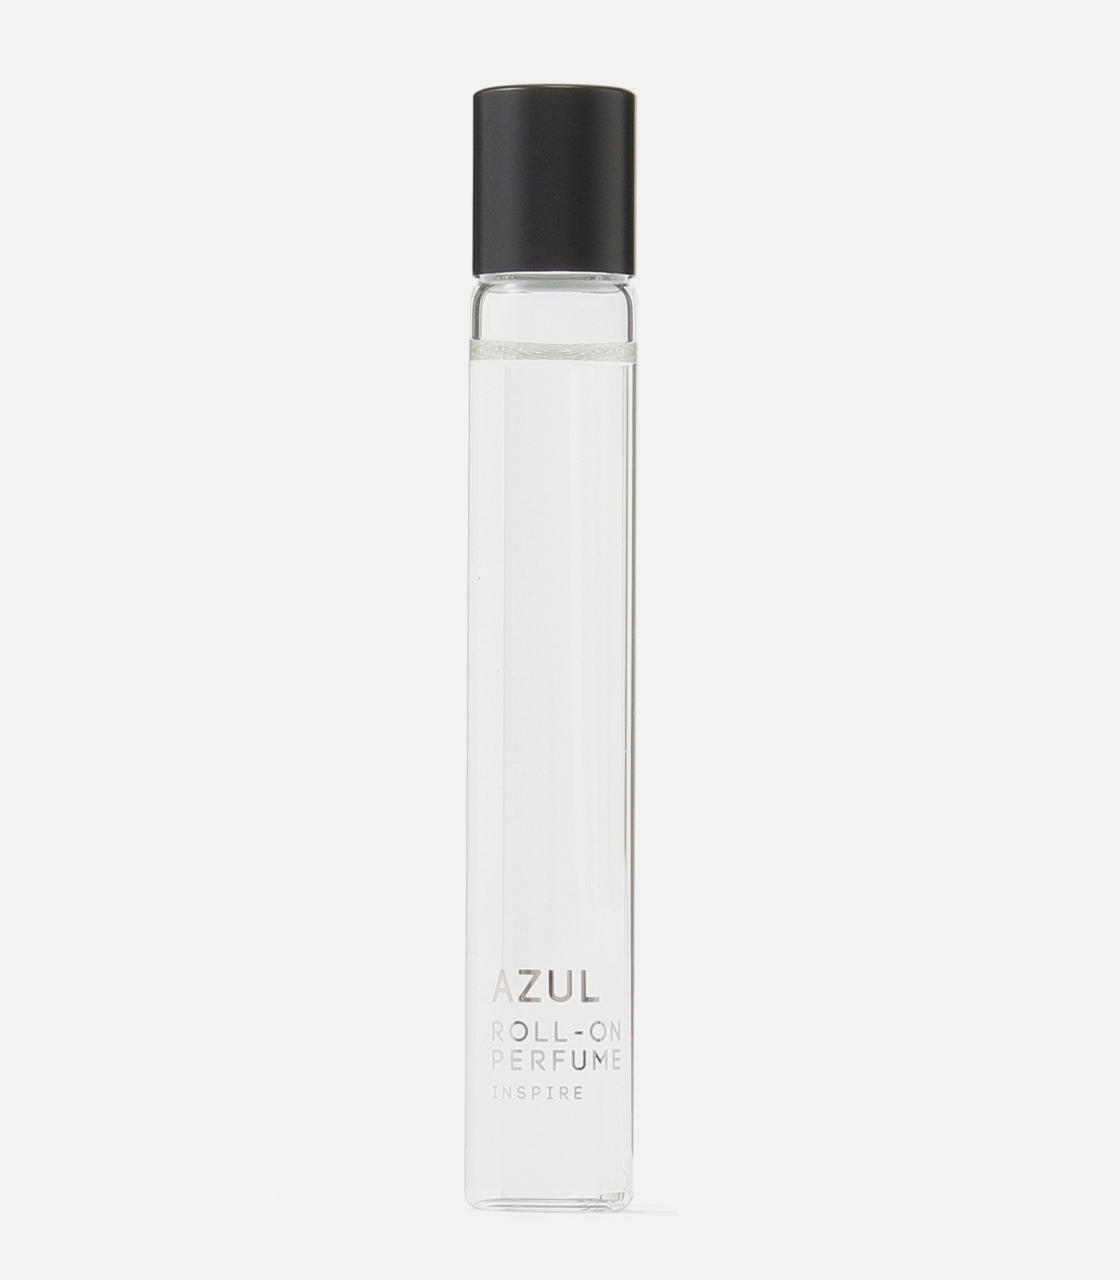 Azul Roll On Perfume アズールロールオンパフューム Azul By Moussy アズールバイマウジー 公式通販サイト